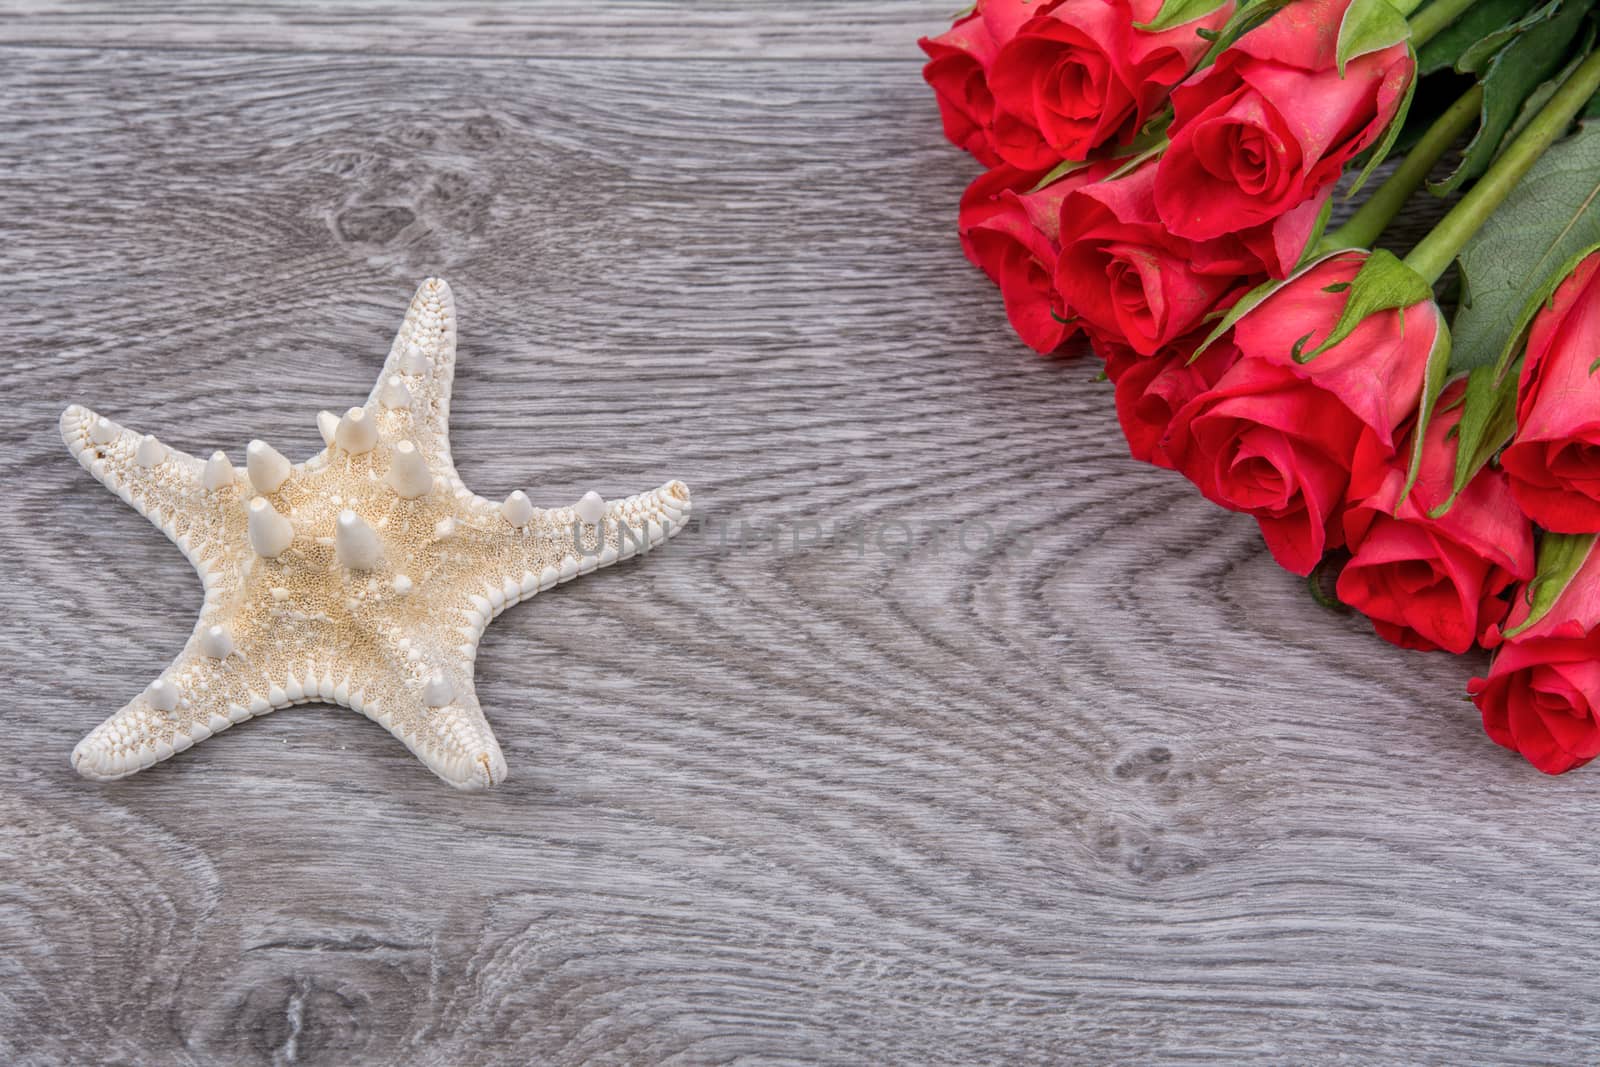 White starfish and red roses on a wooden background